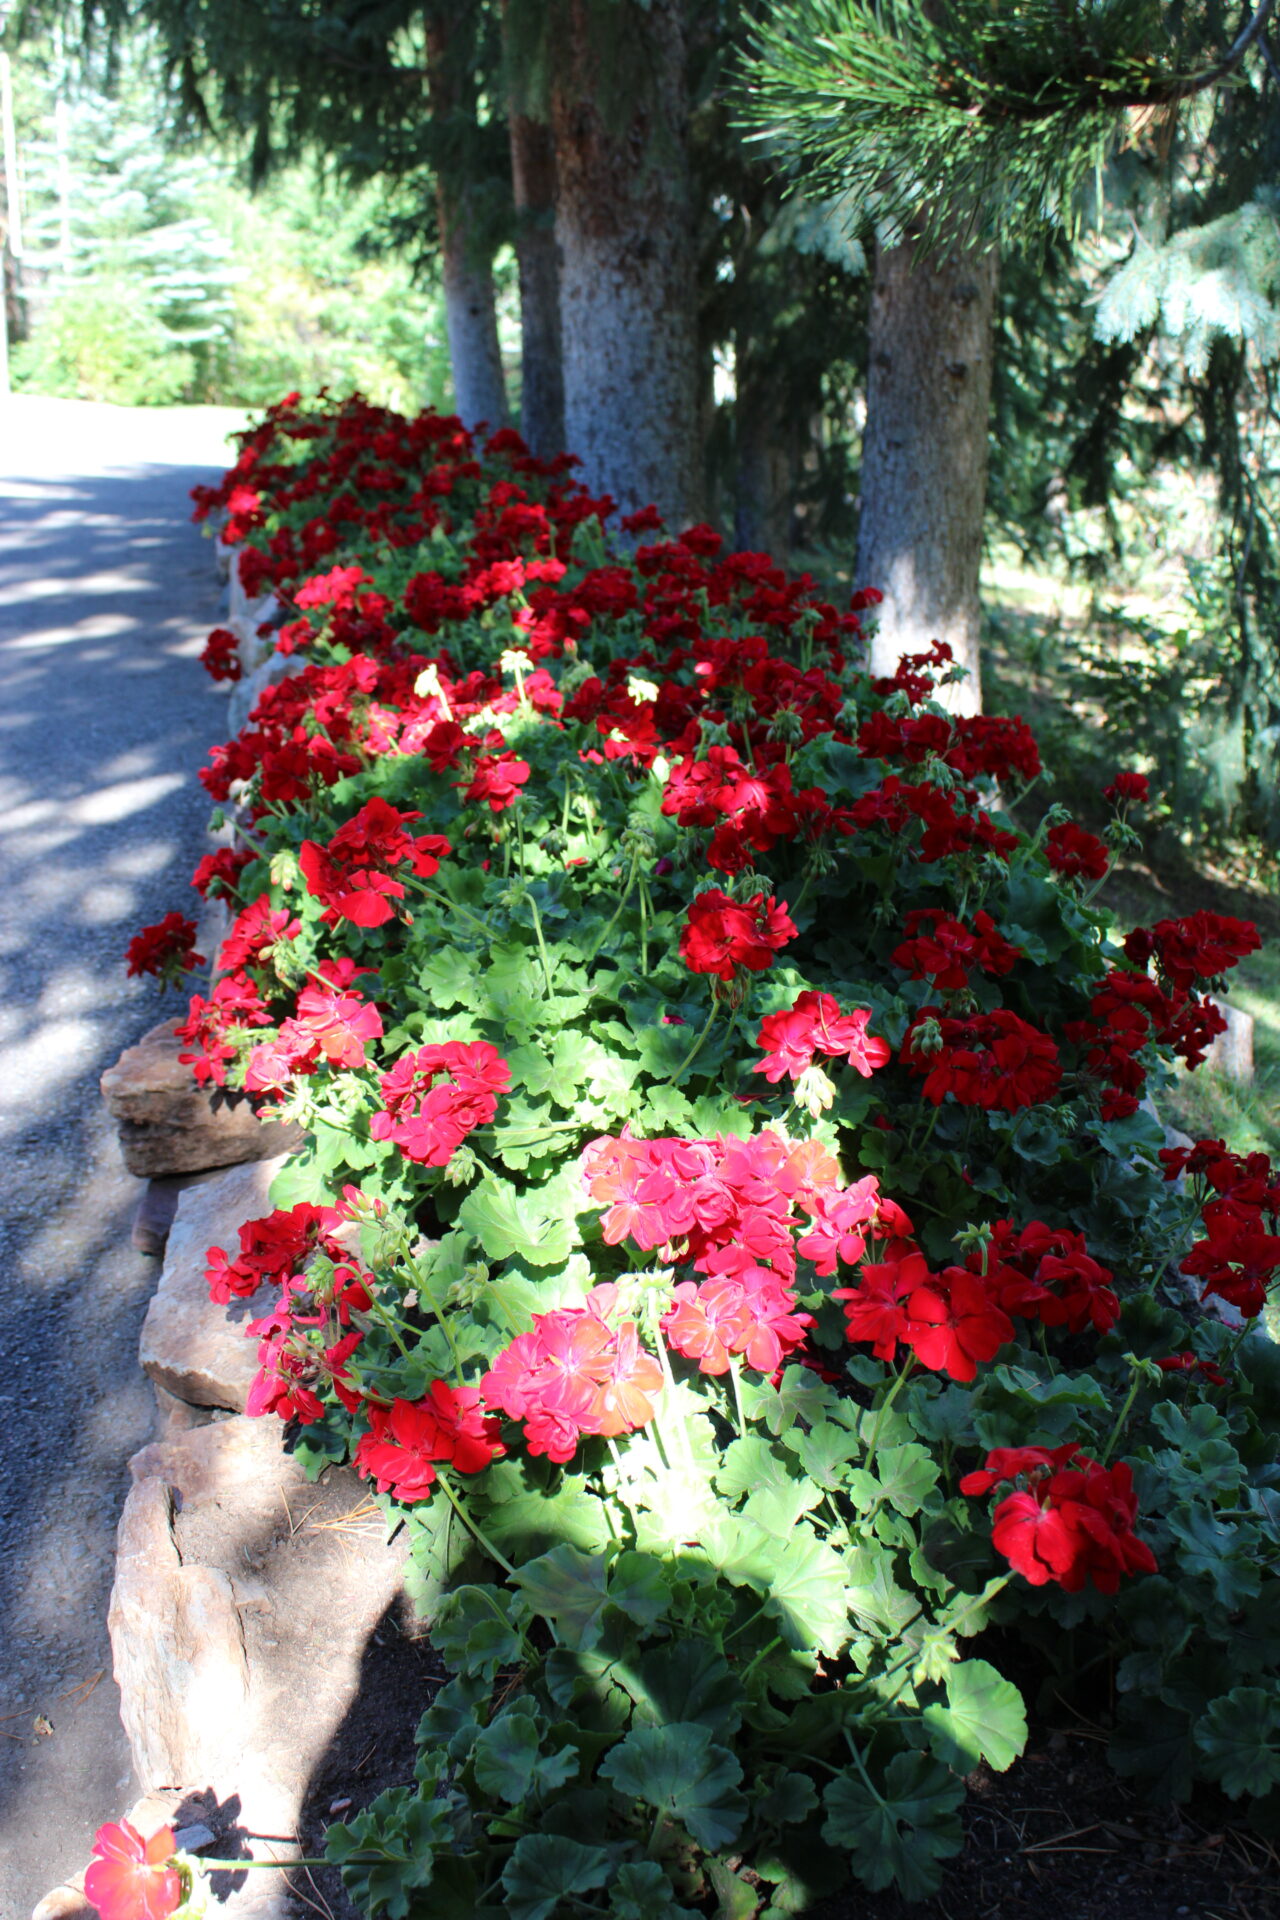 A vibrant flowerbed of red geraniums lines a shaded pathway, bordered by stones, under the canopy of pine trees in a serene park setting.